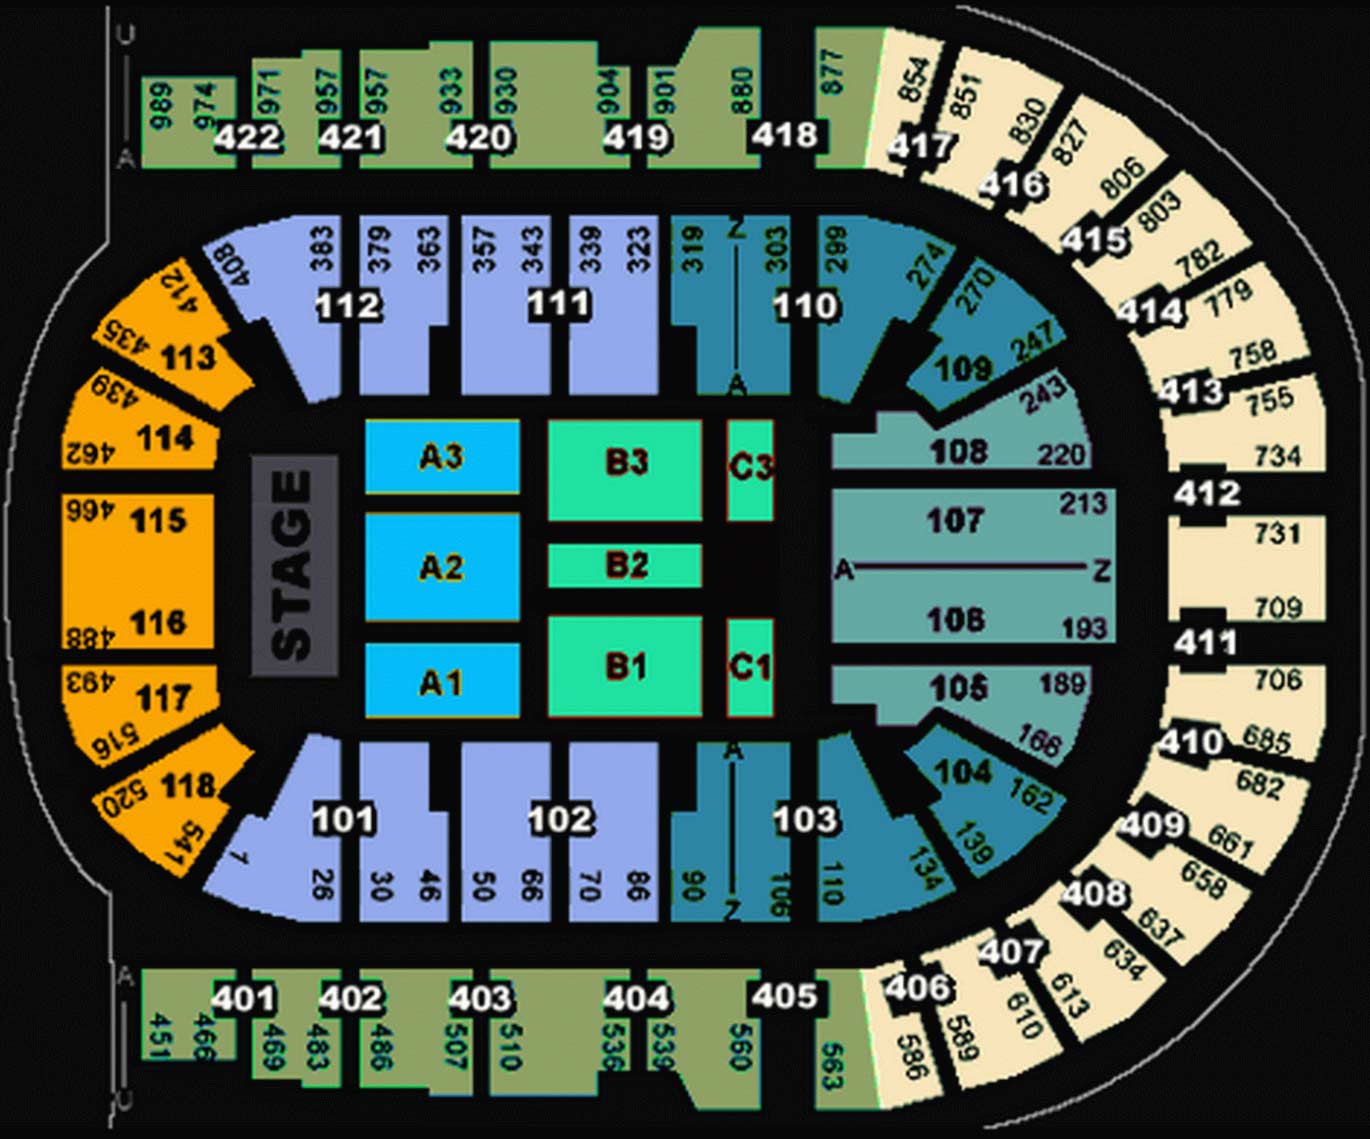 The O2 Arena London seating plan Detailed seat numbers chart